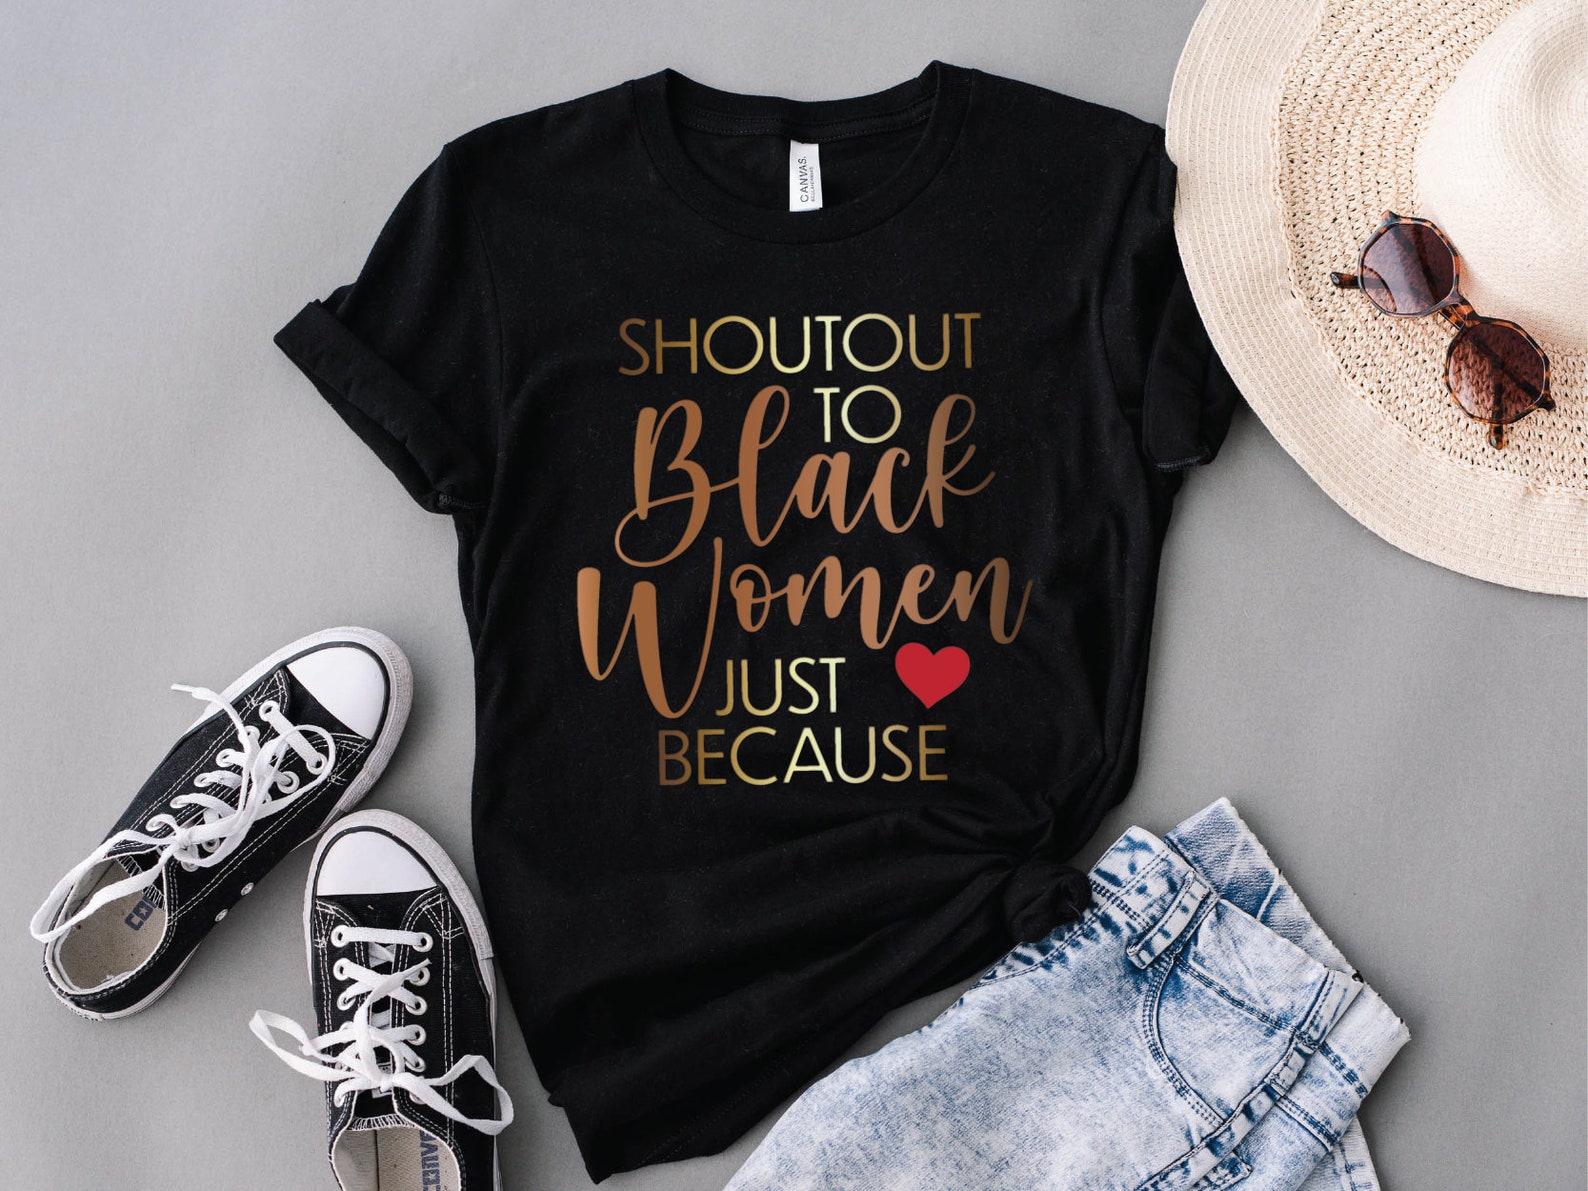 Shoutout to Black Woman Just Because SVG Black Queen Svg - Etsy